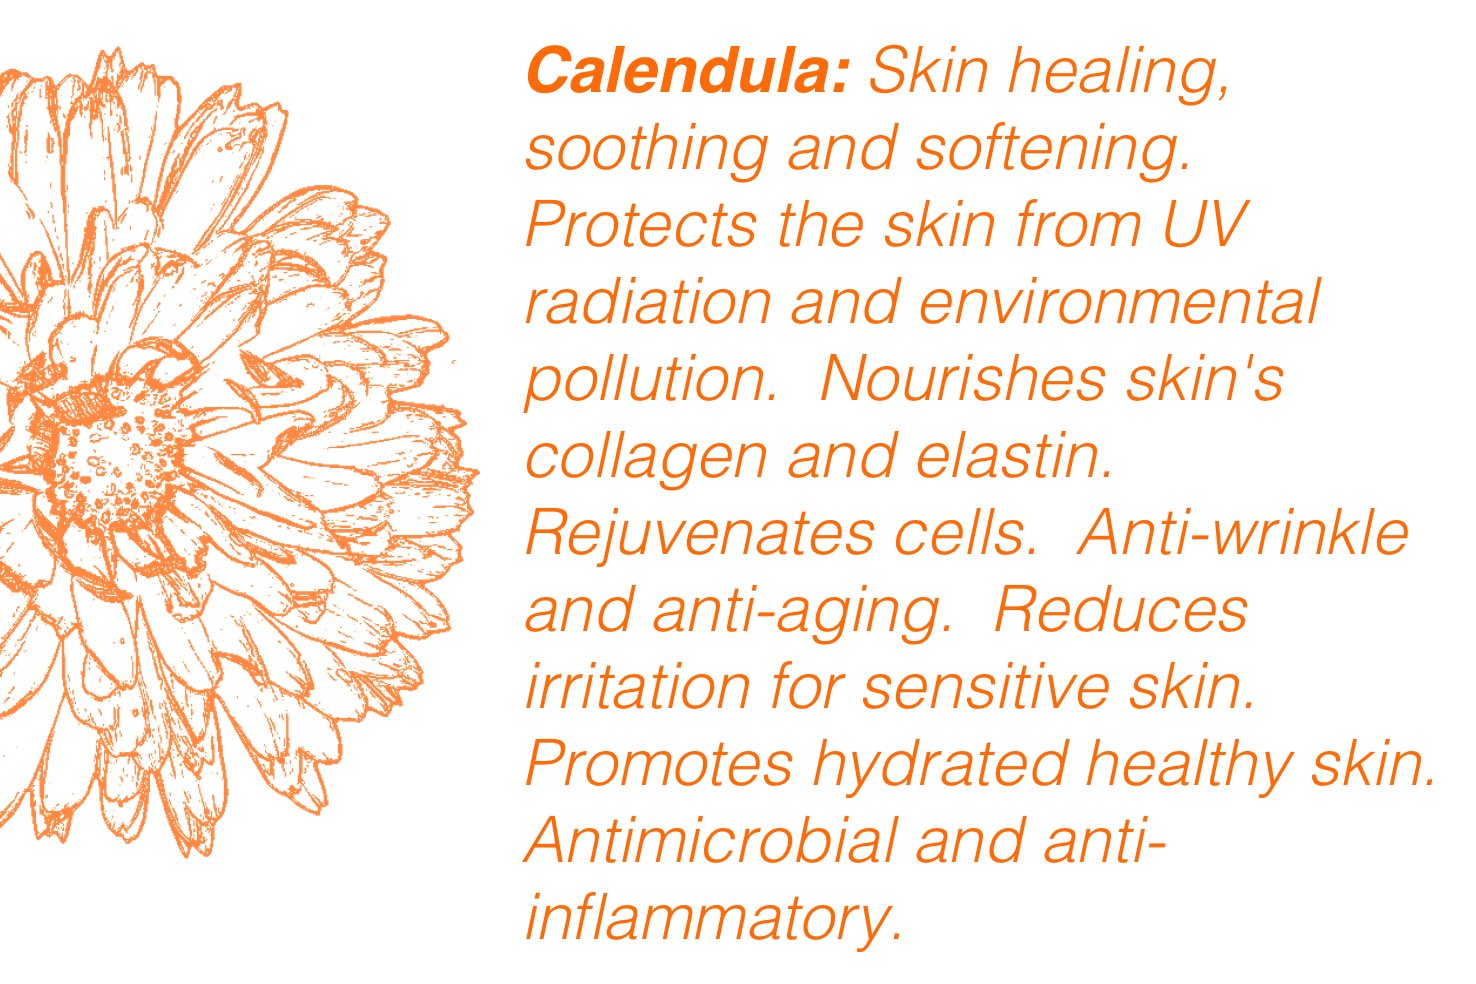 What are the benefits of Calendula flowers?